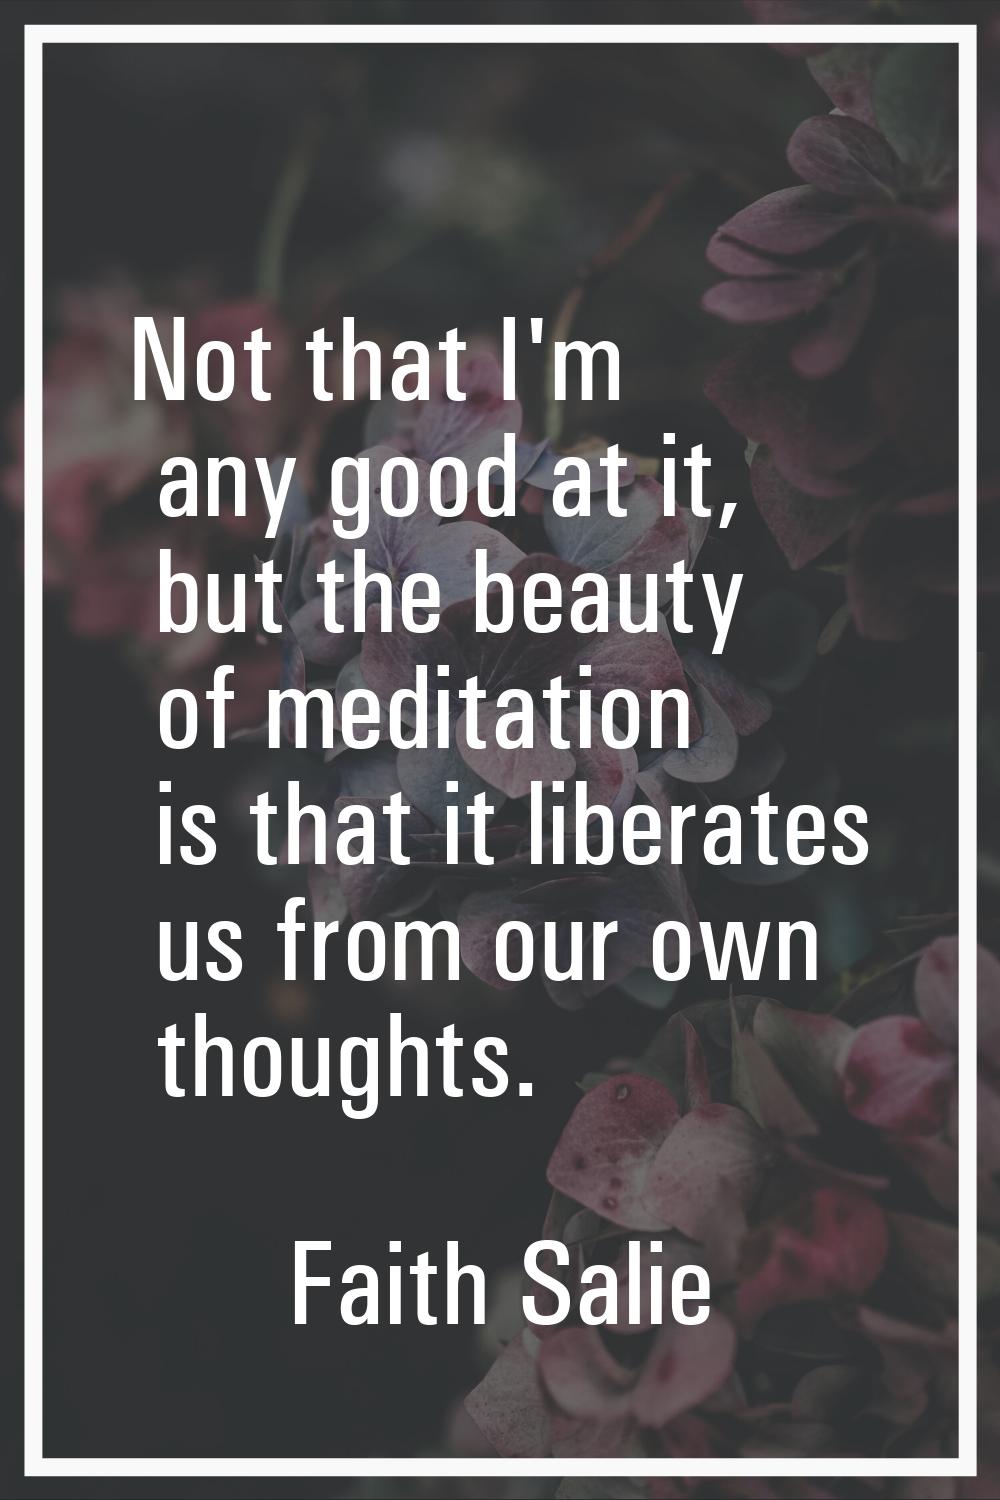 Not that I'm any good at it, but the beauty of meditation is that it liberates us from our own thou